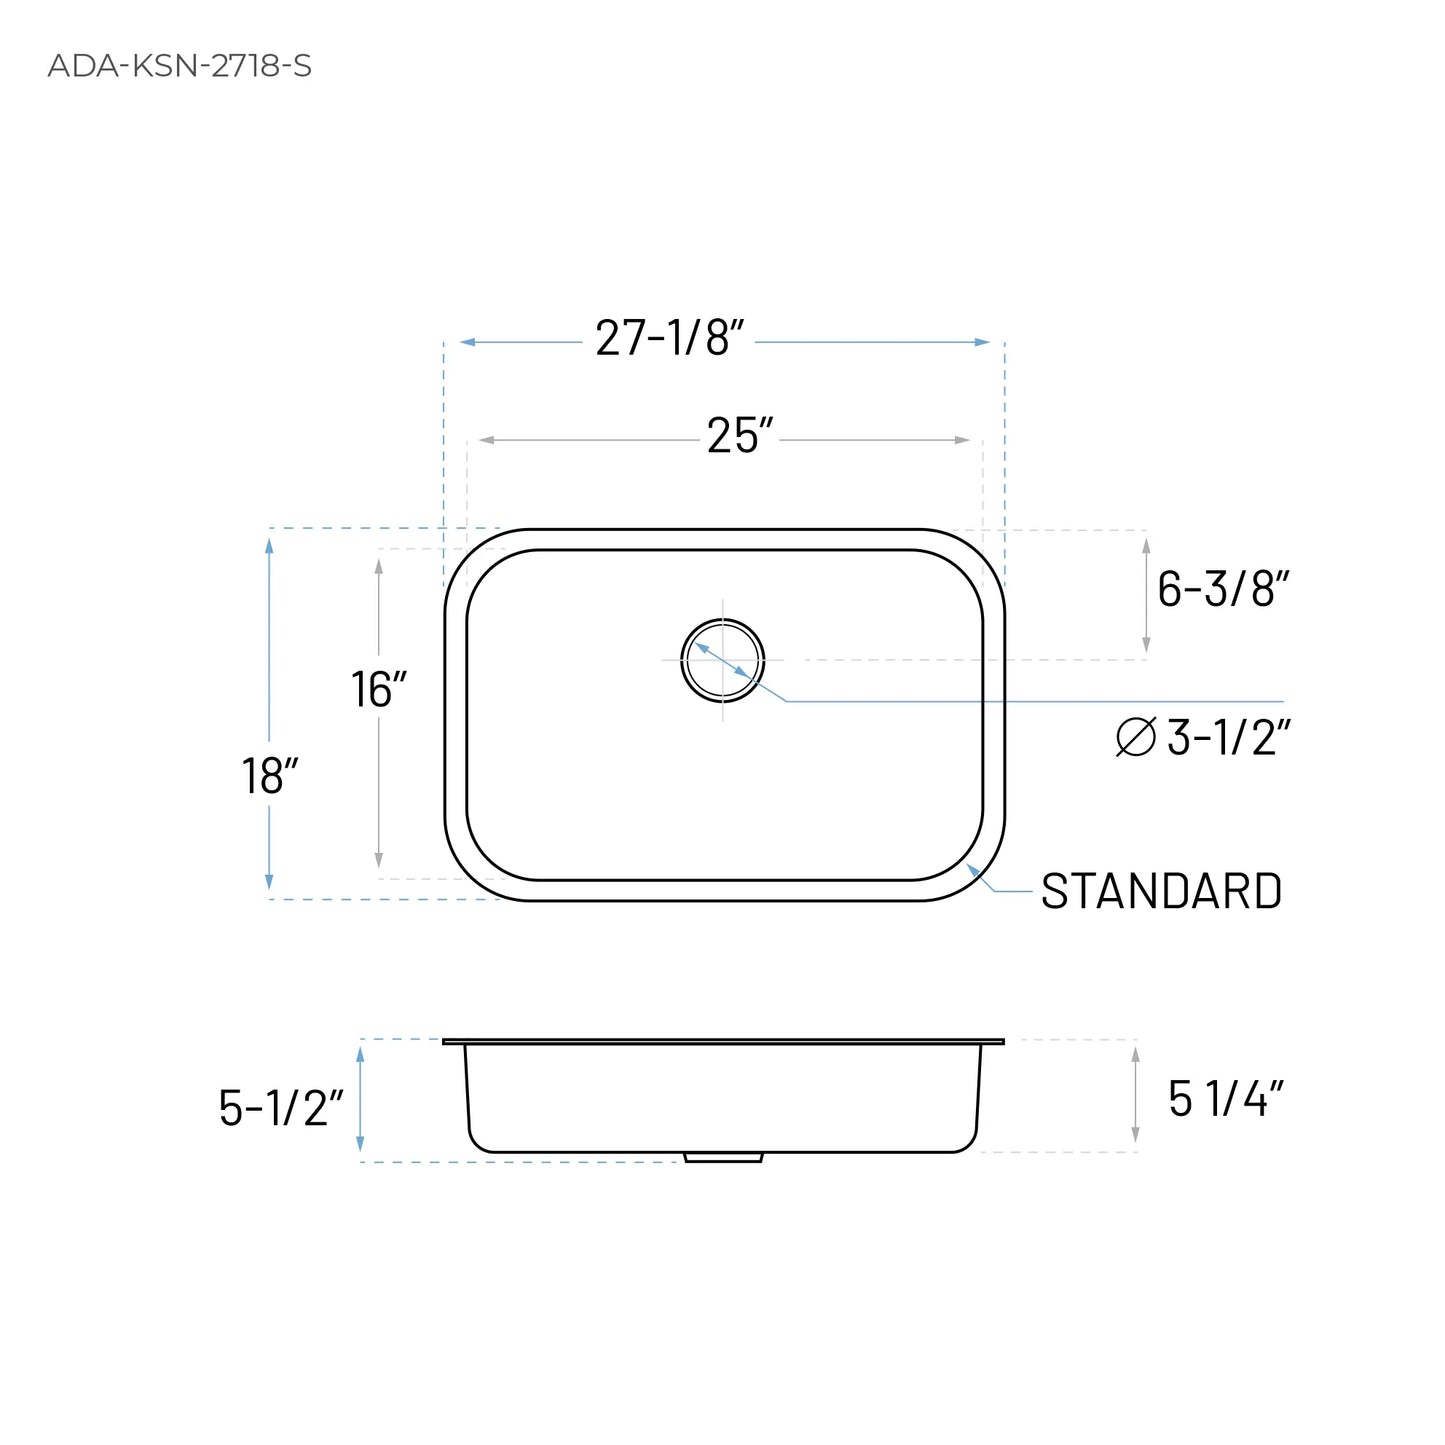 Technical Drawing of an ADA stainless steel kitchen sink 